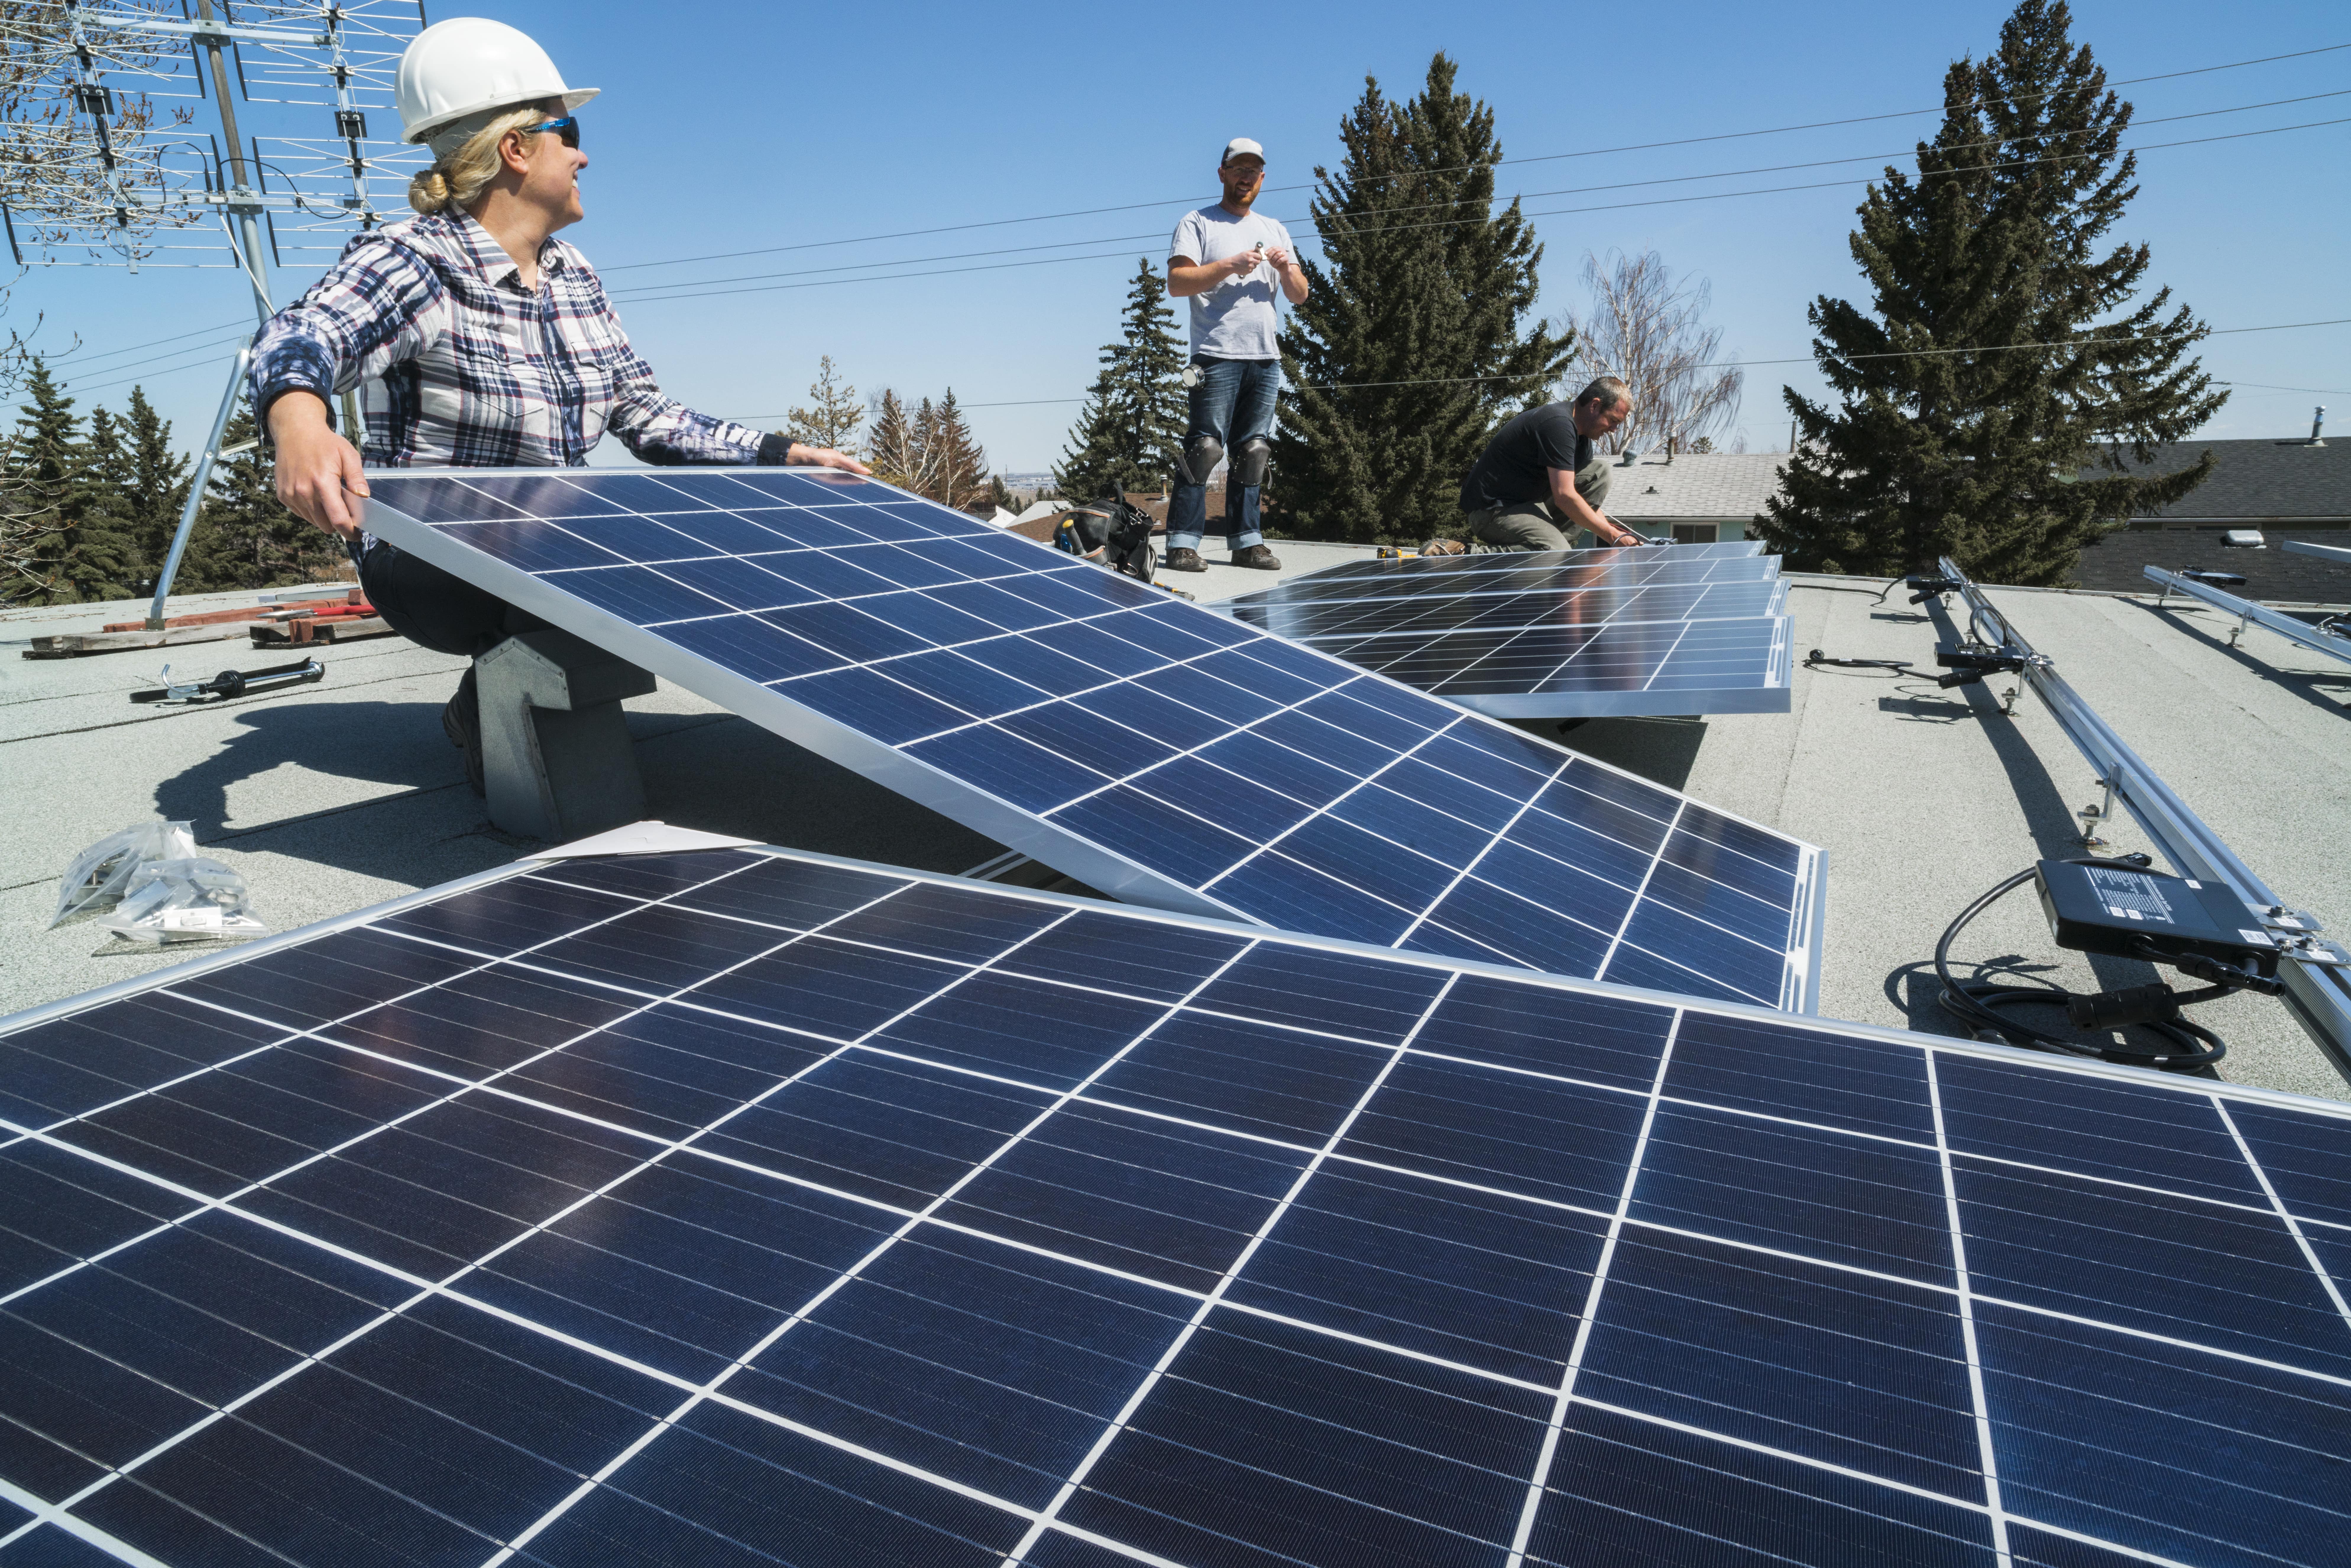 A group of workers installing solar panels on a roof